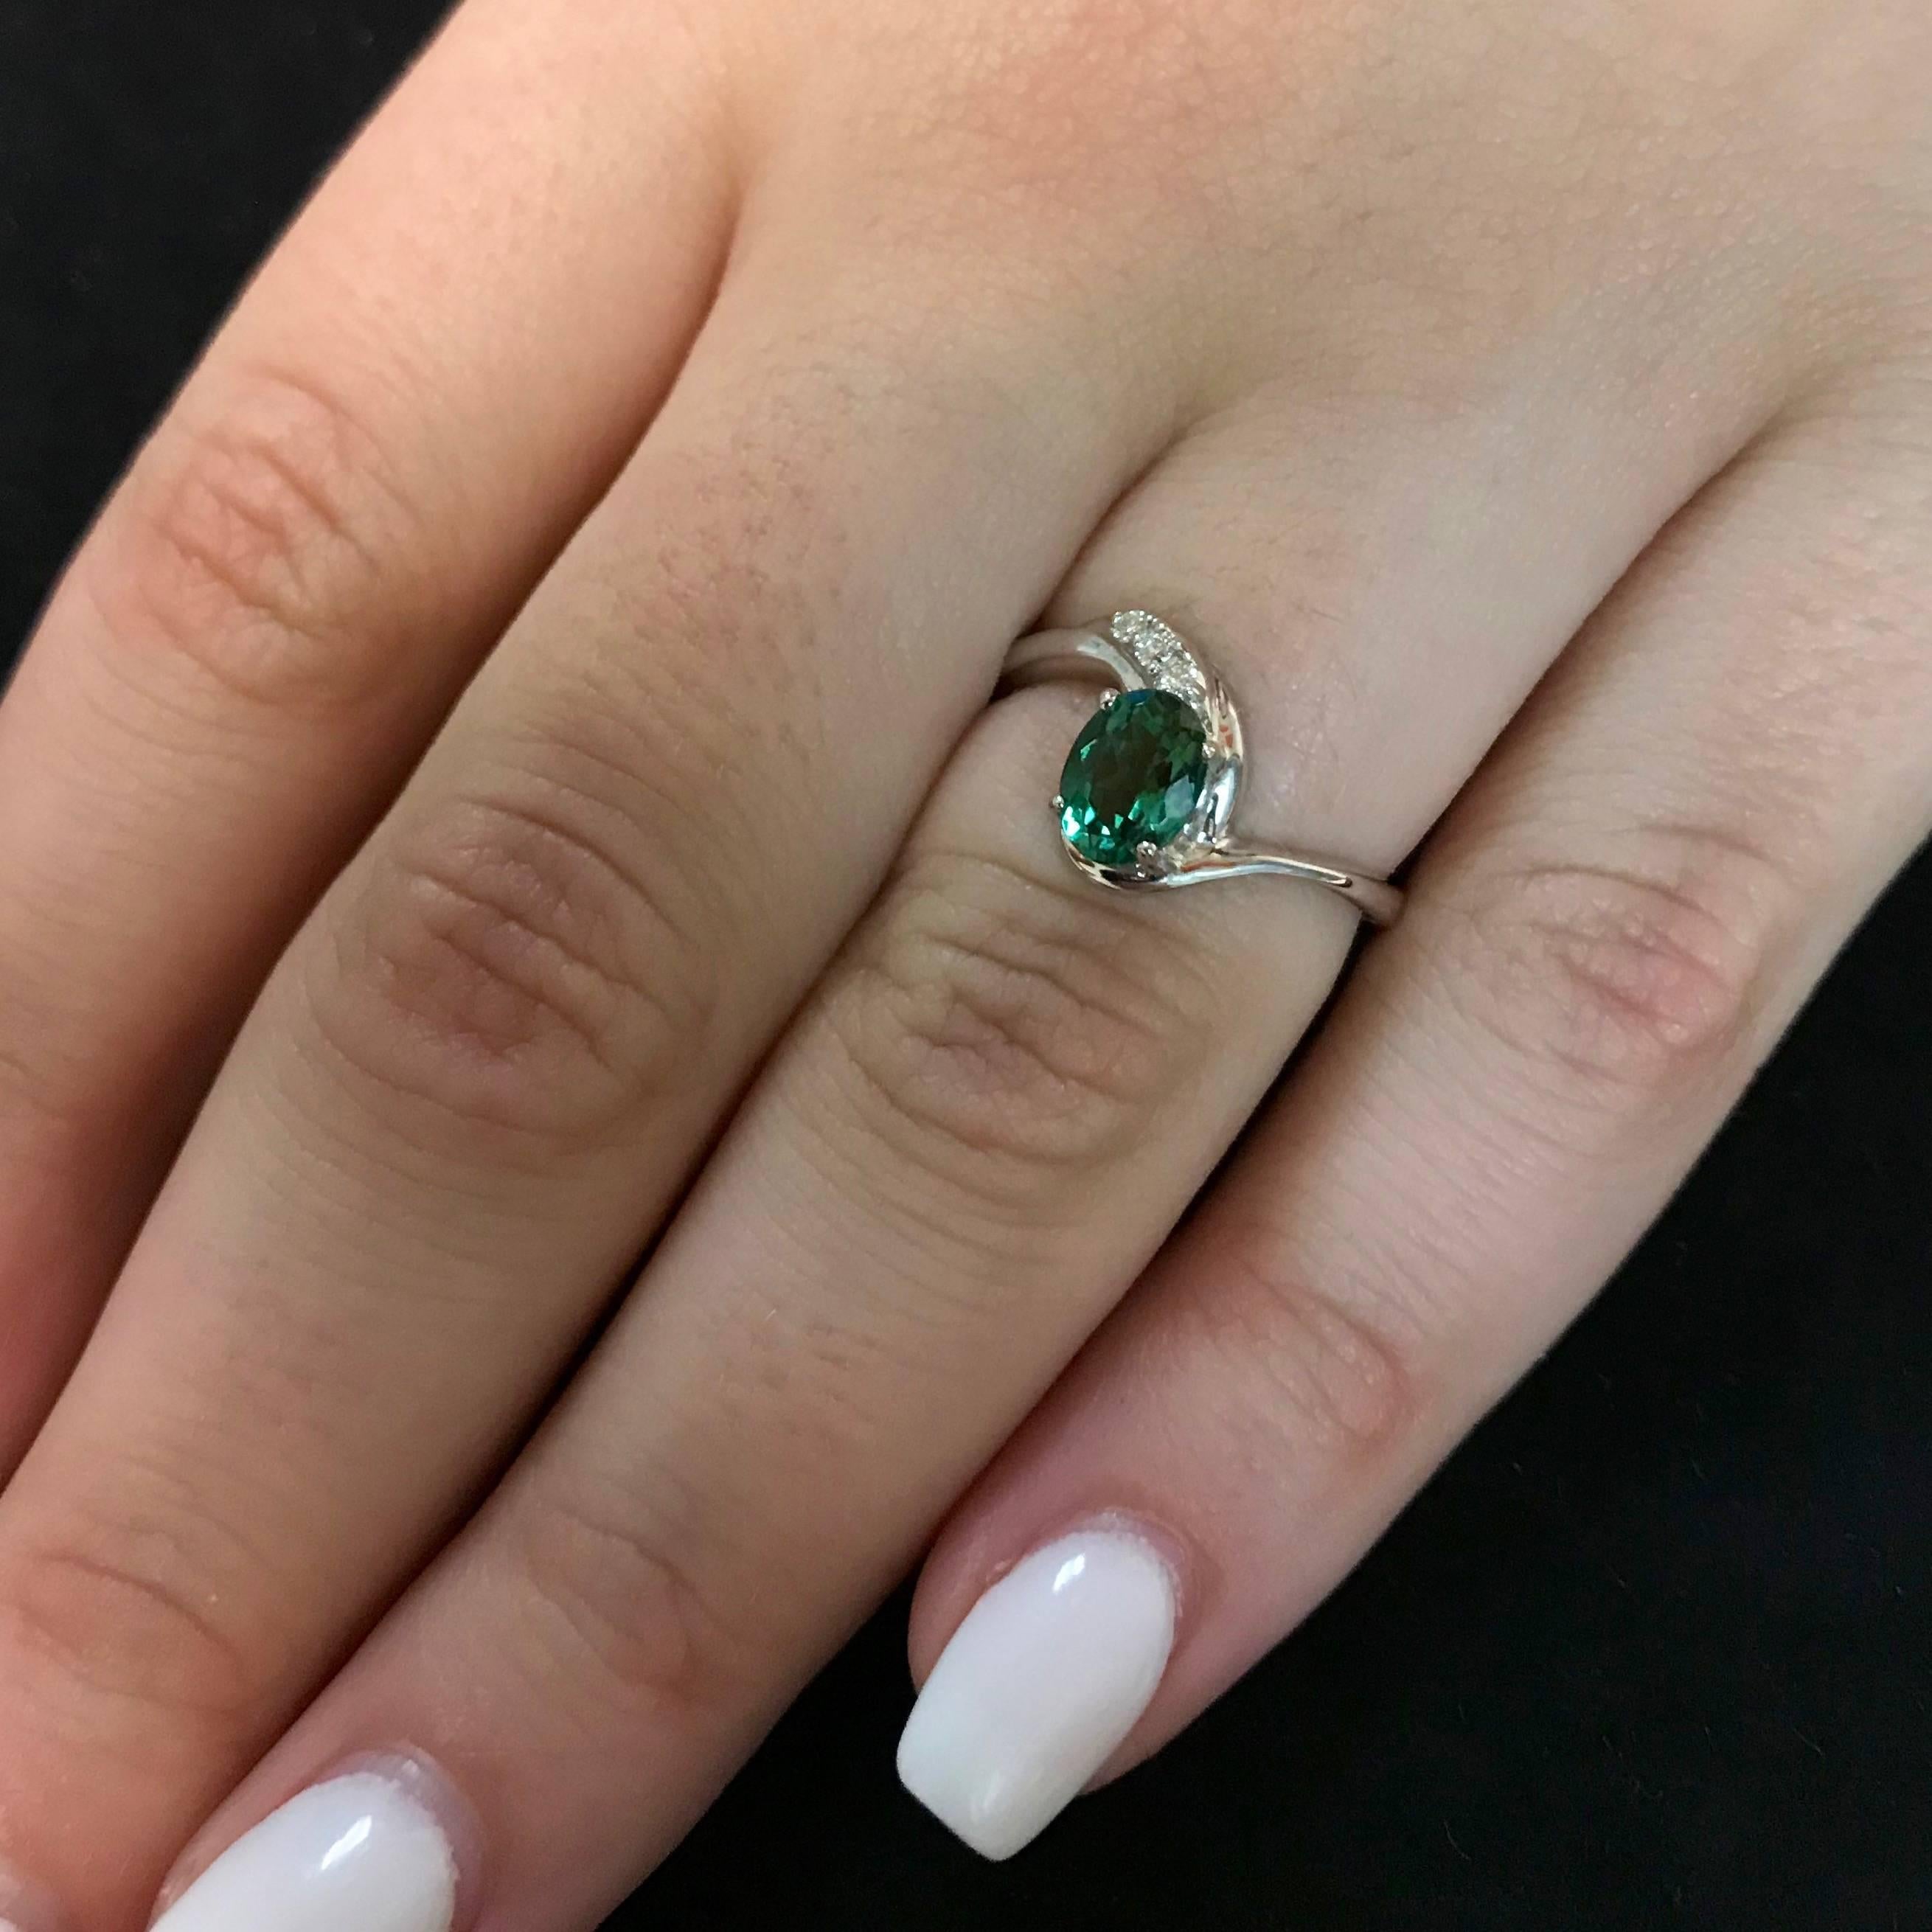 Material: 14k White Gold 
Center Stone Details: 0.75 Carat Oval Green Tourmaline 6.8 x 5 mm
Mounting Diamond Details: 3 Round White Diamonds Approximately 0.03 Carats - Clarity: SI / Color: H-I
Ring Size: Size 5.5 (can be sized)

Fine one-of-a kind